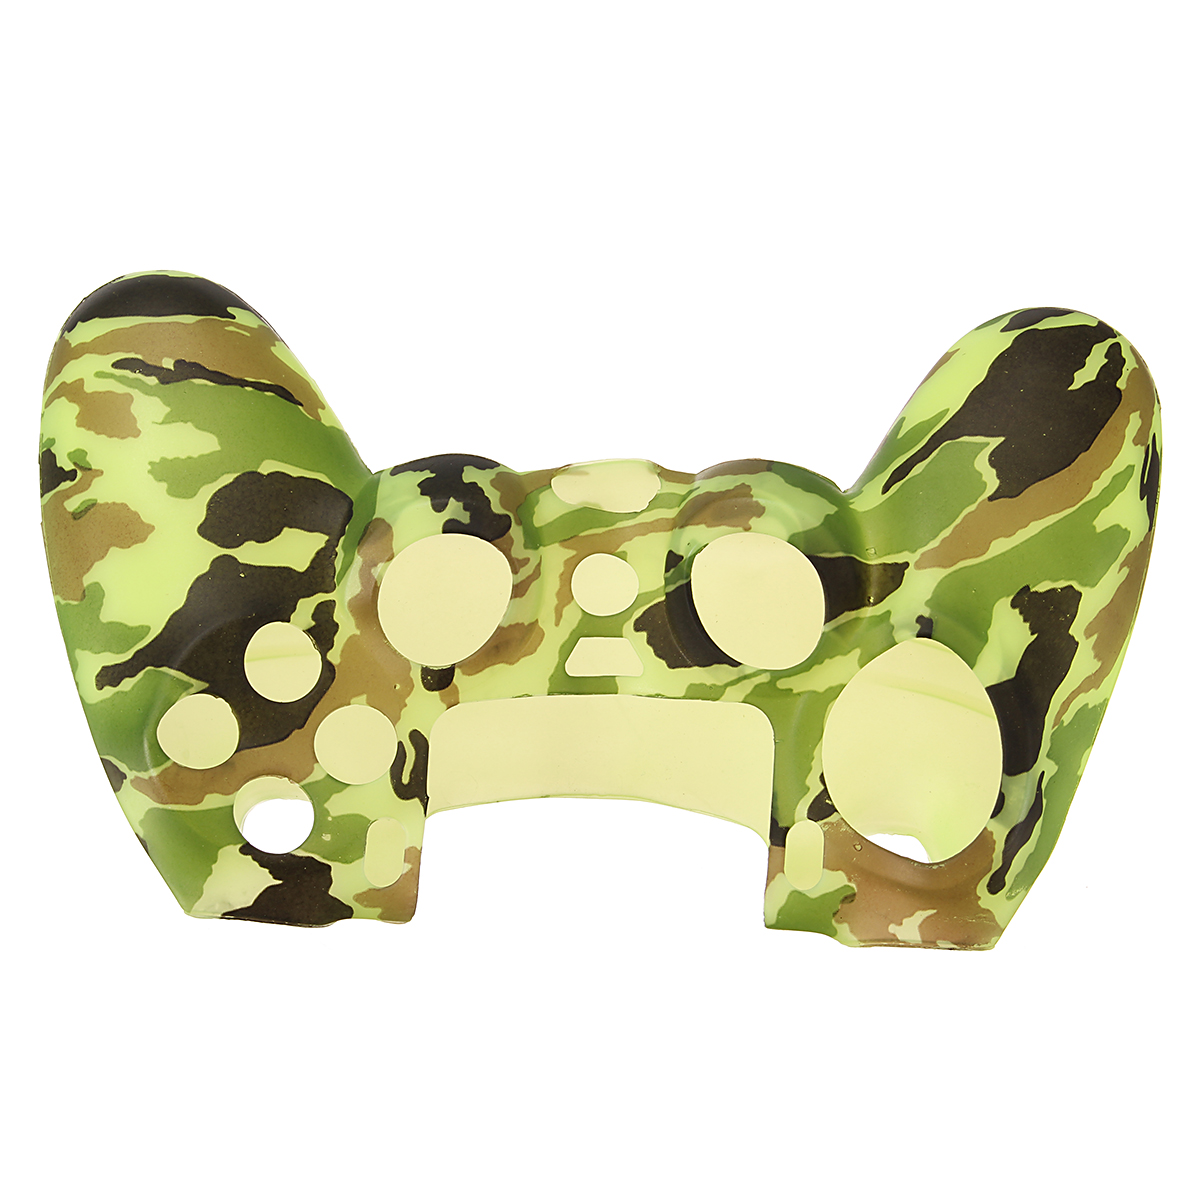 Durable Decal Camouflage Grip Cover Case Silicone Rubber Soft Skin Protector for Playstation 4 for Dualshock 4 Gamepad 22